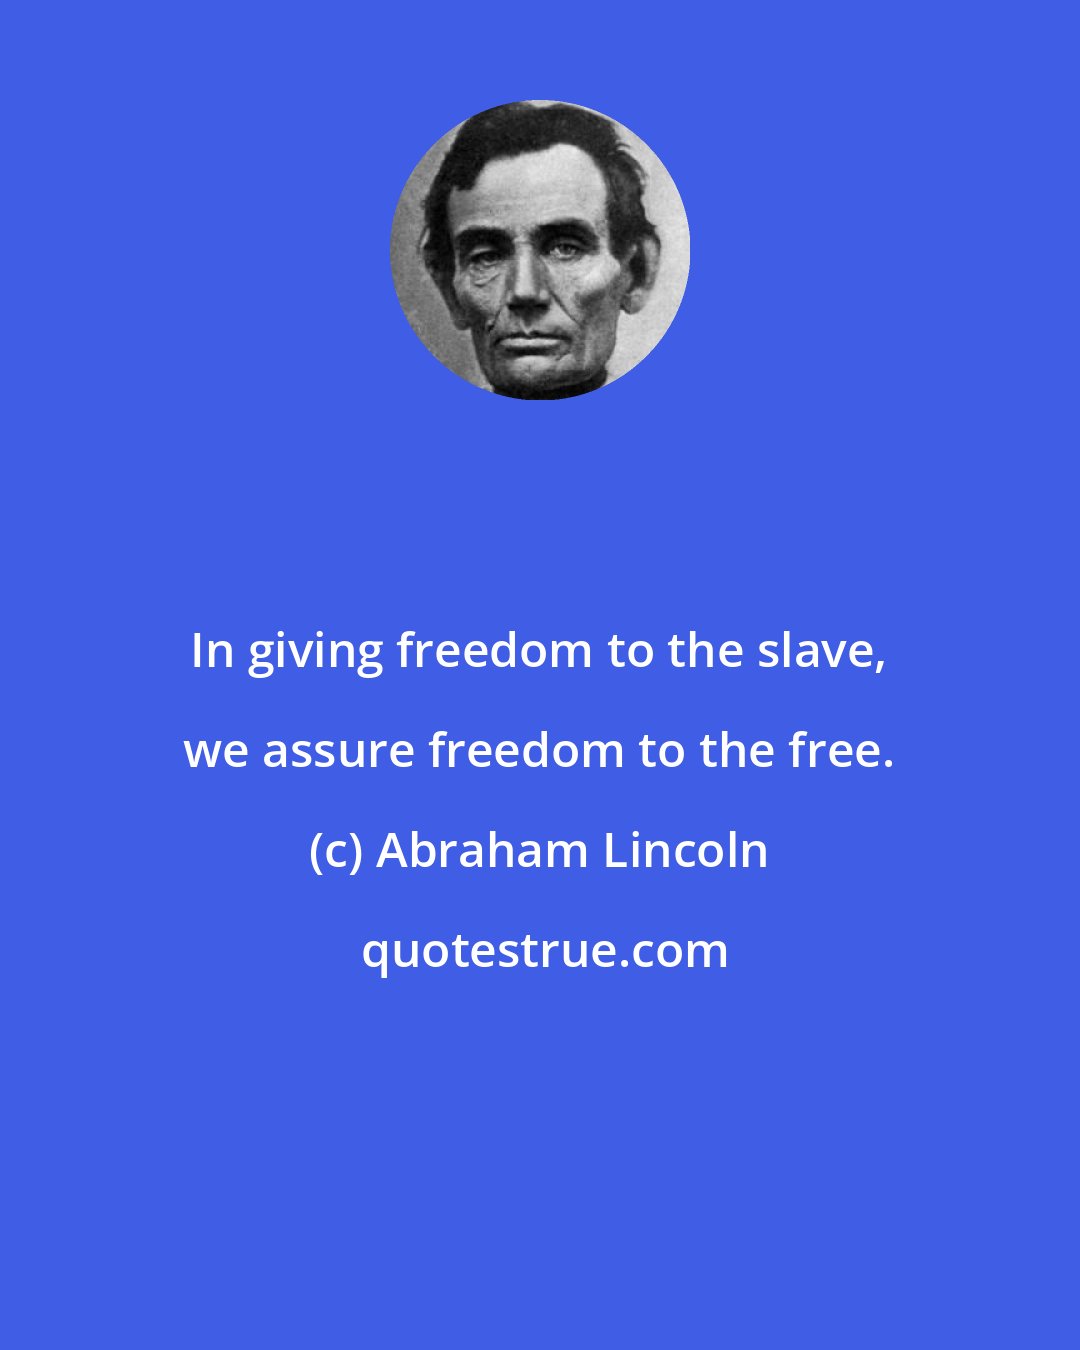 Abraham Lincoln: In giving freedom to the slave, we assure freedom to the free.